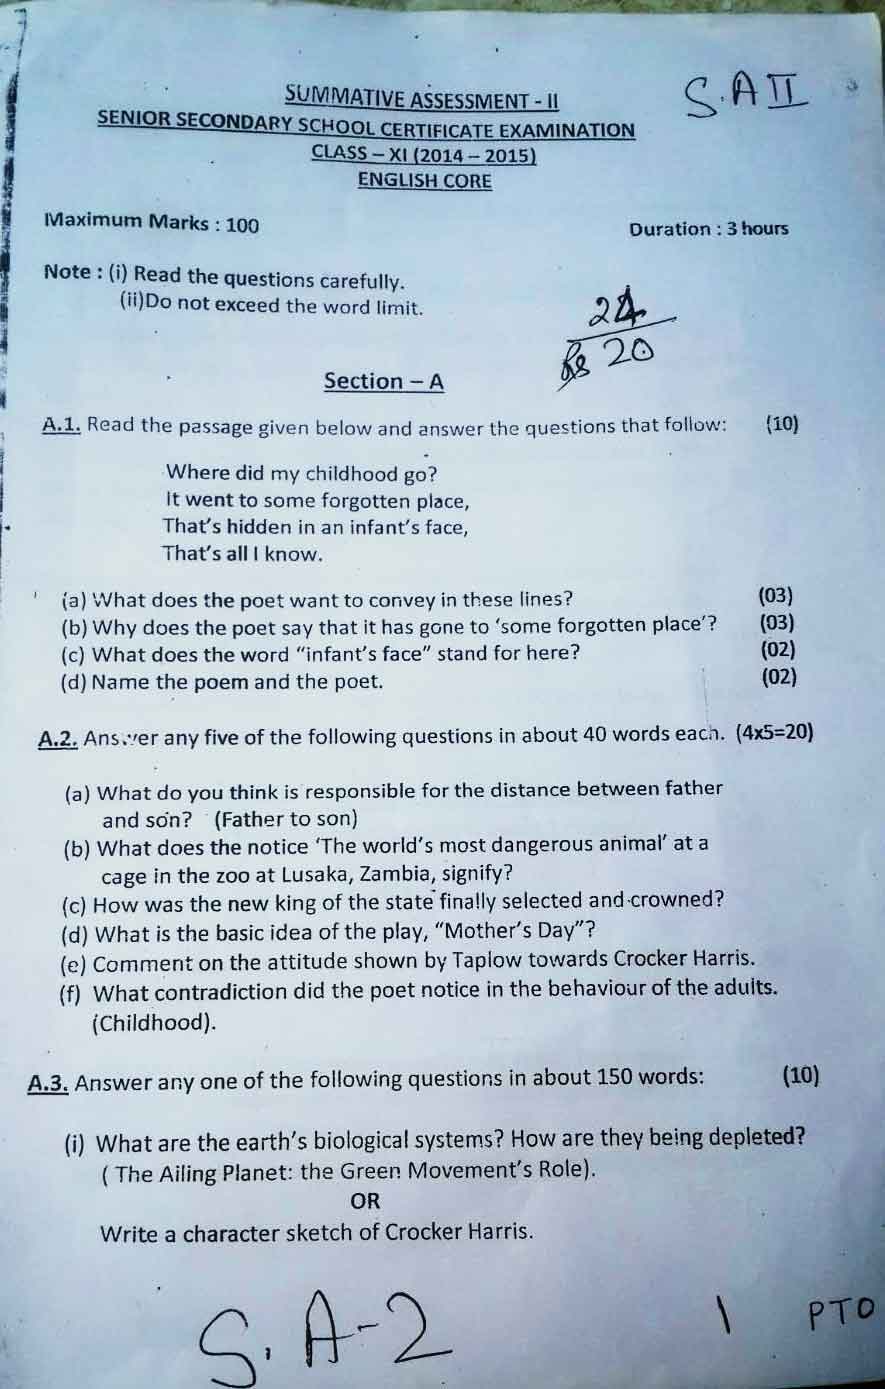 CBSE SureShot Questions Poets and Pancakes Class 12 English